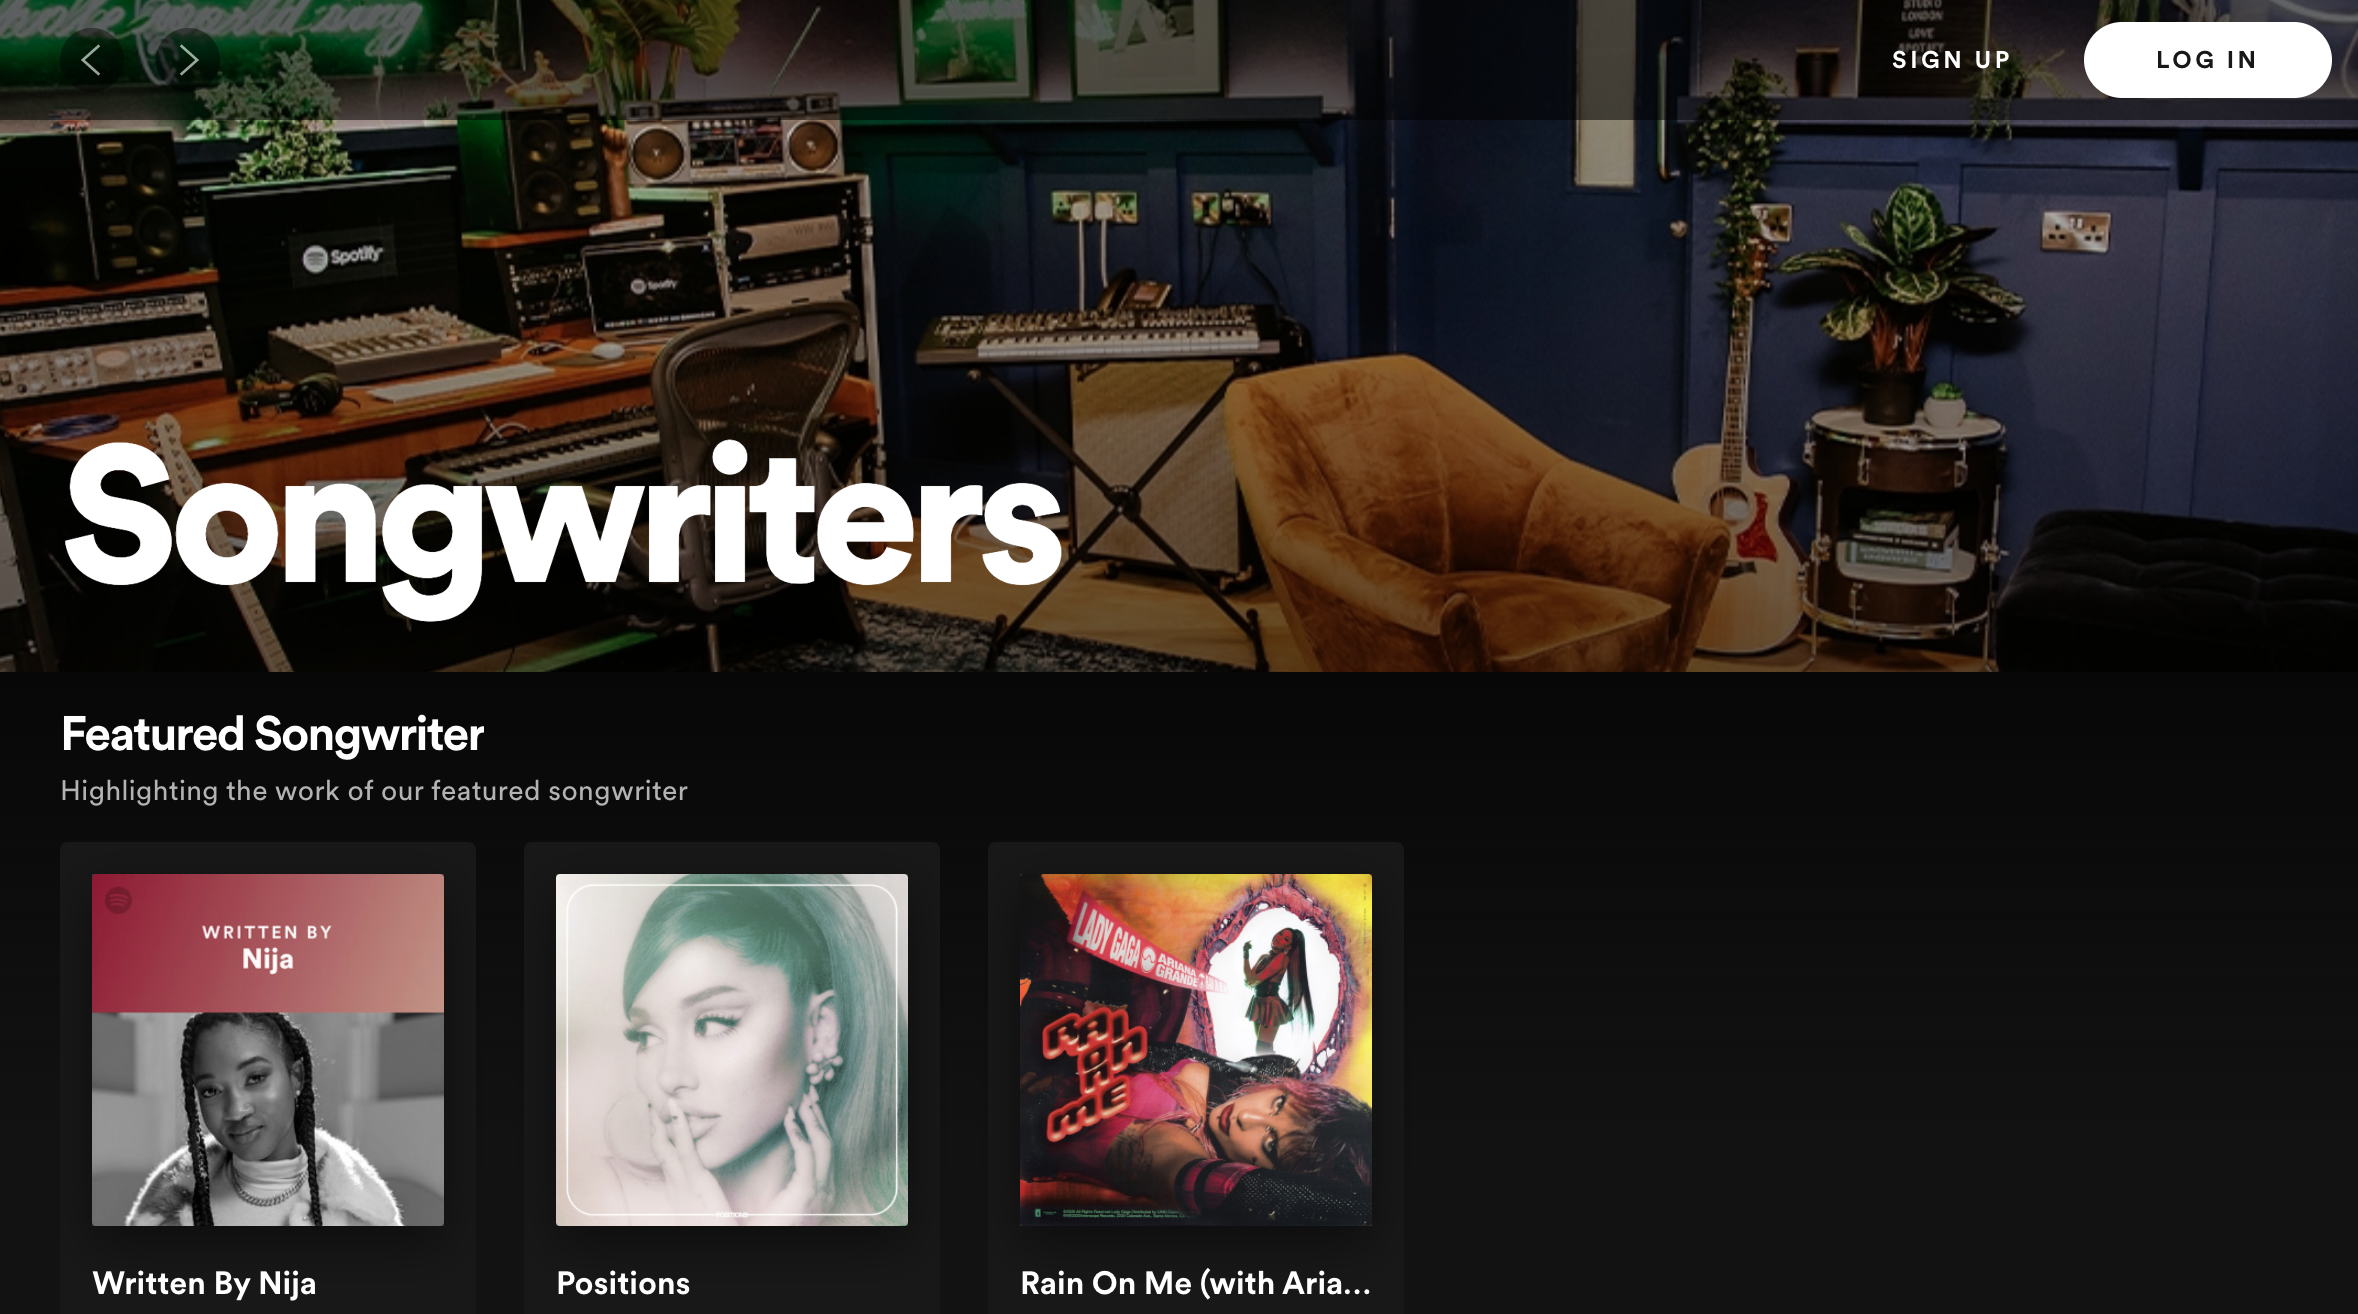 Spotify launches new hub to spotlight songwriters